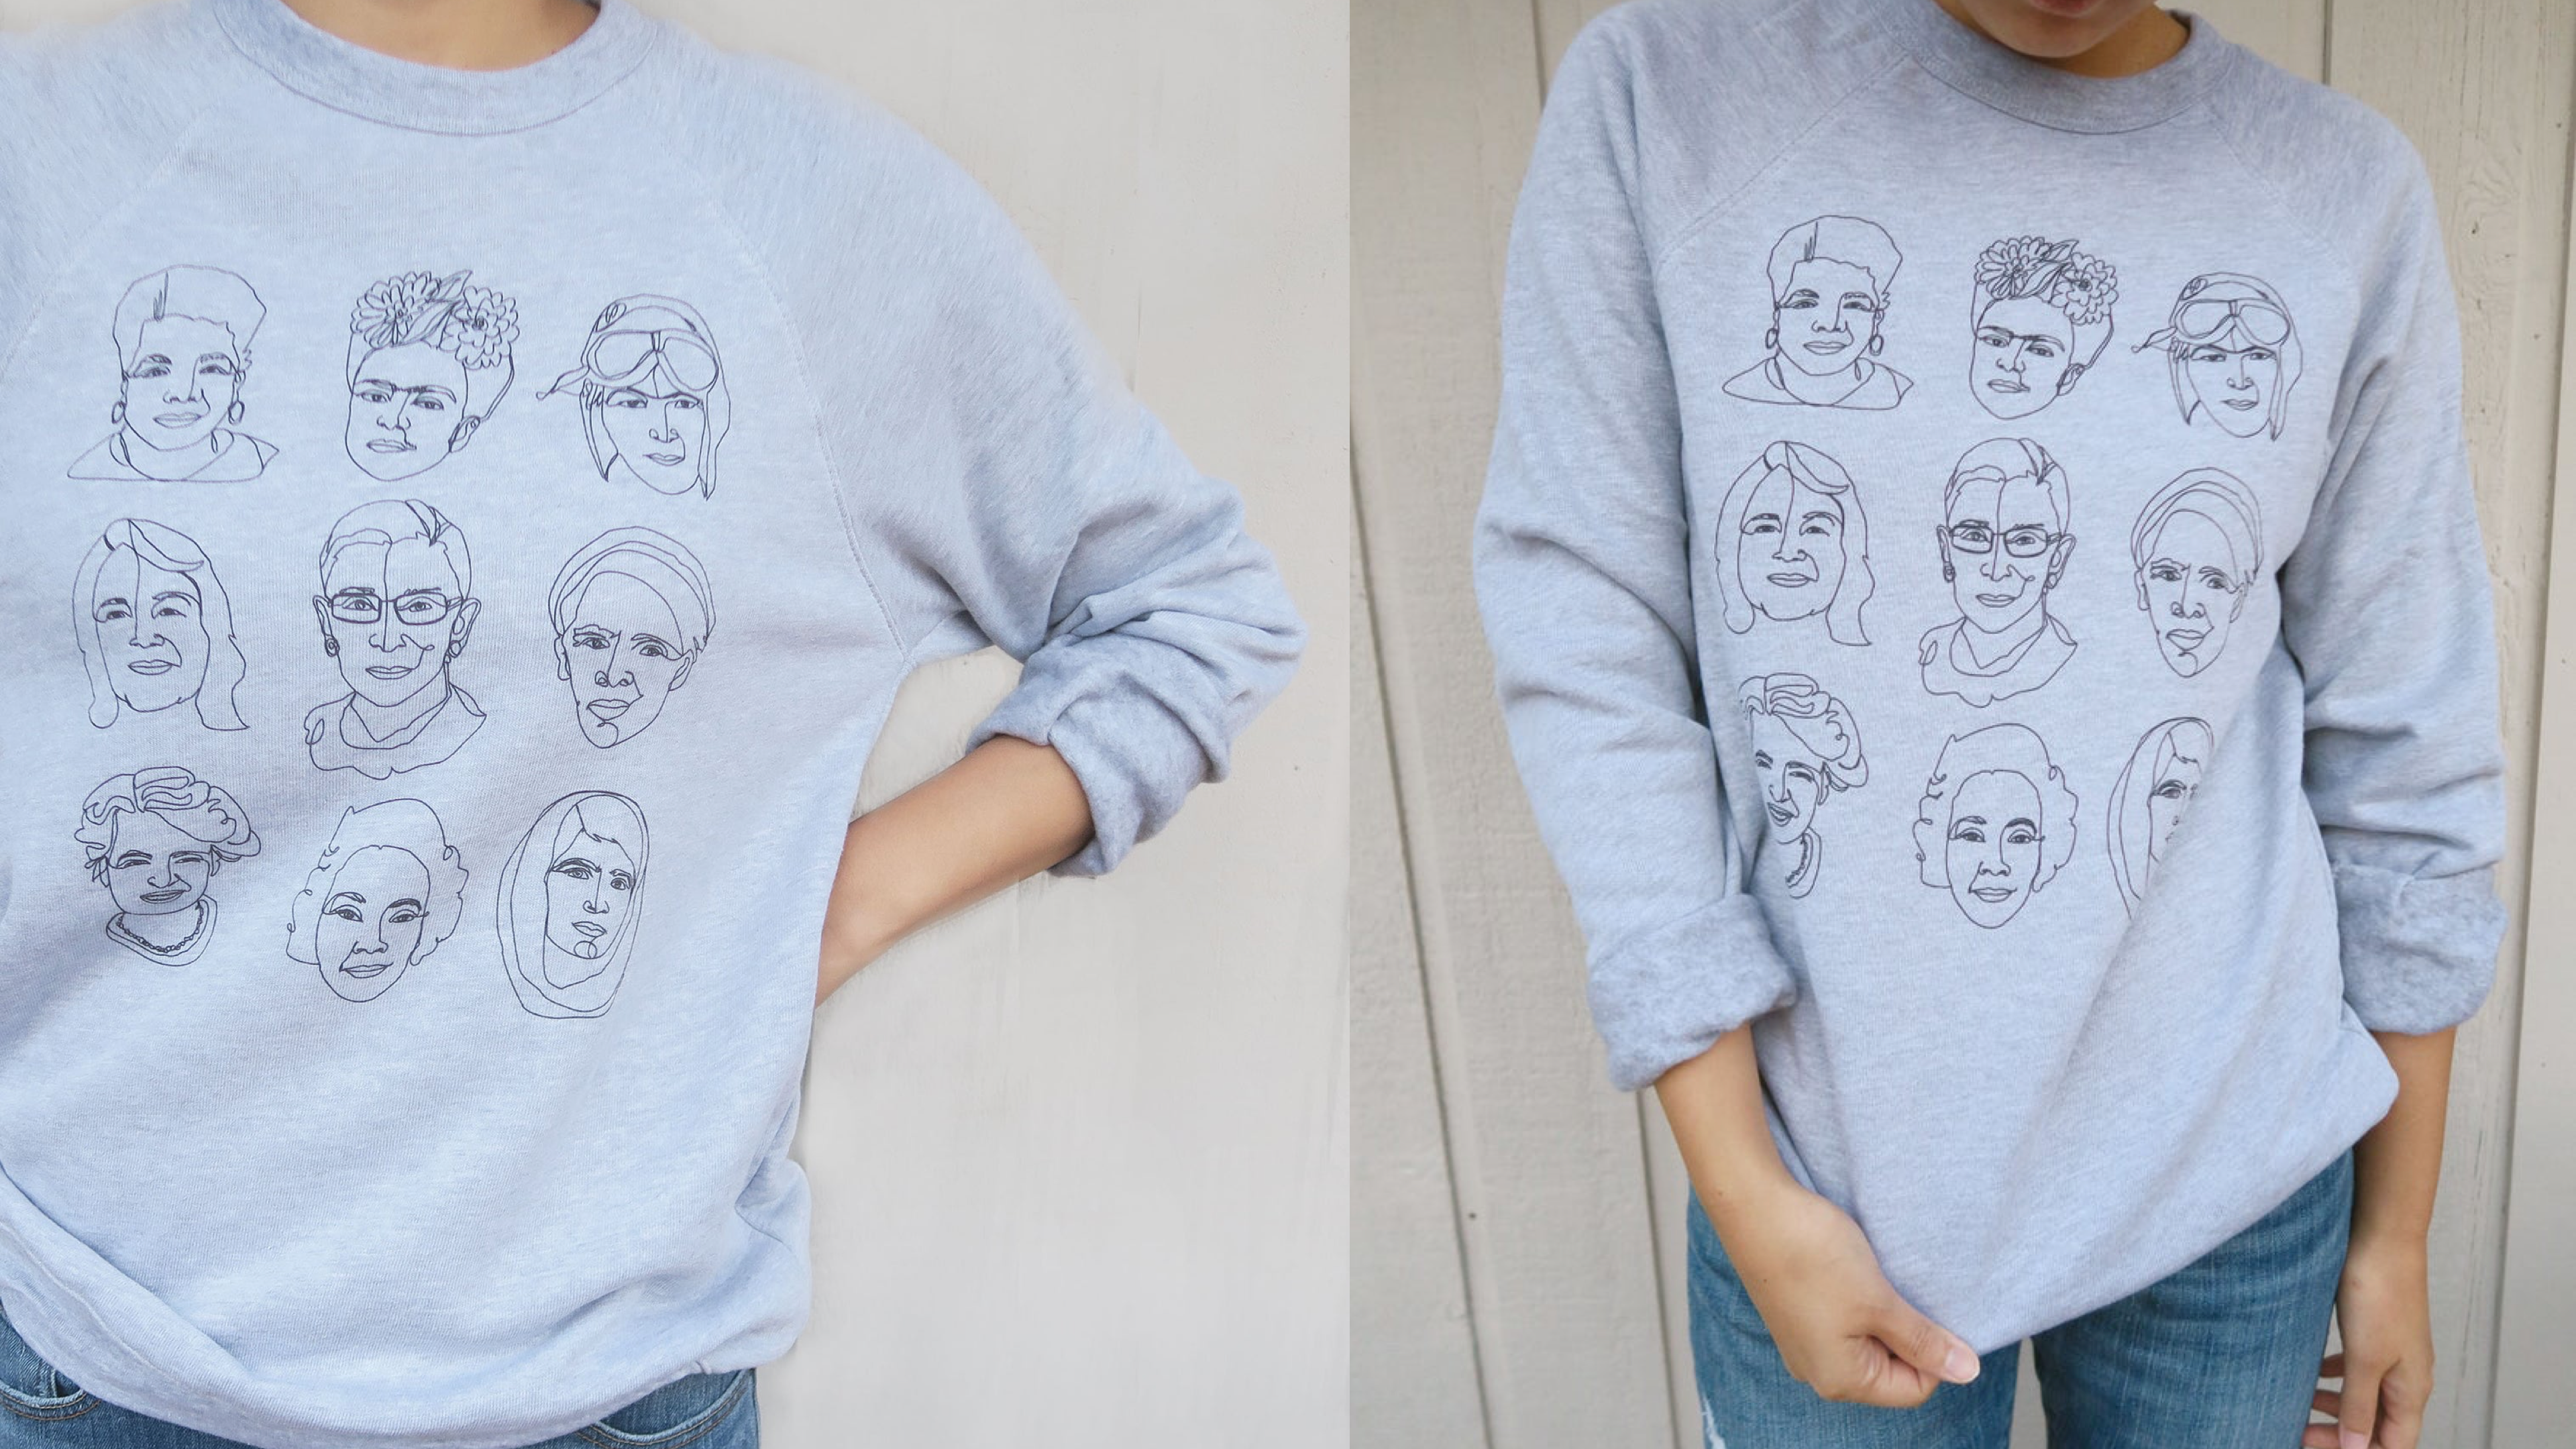 sweatshirt featuring images of famous women in history